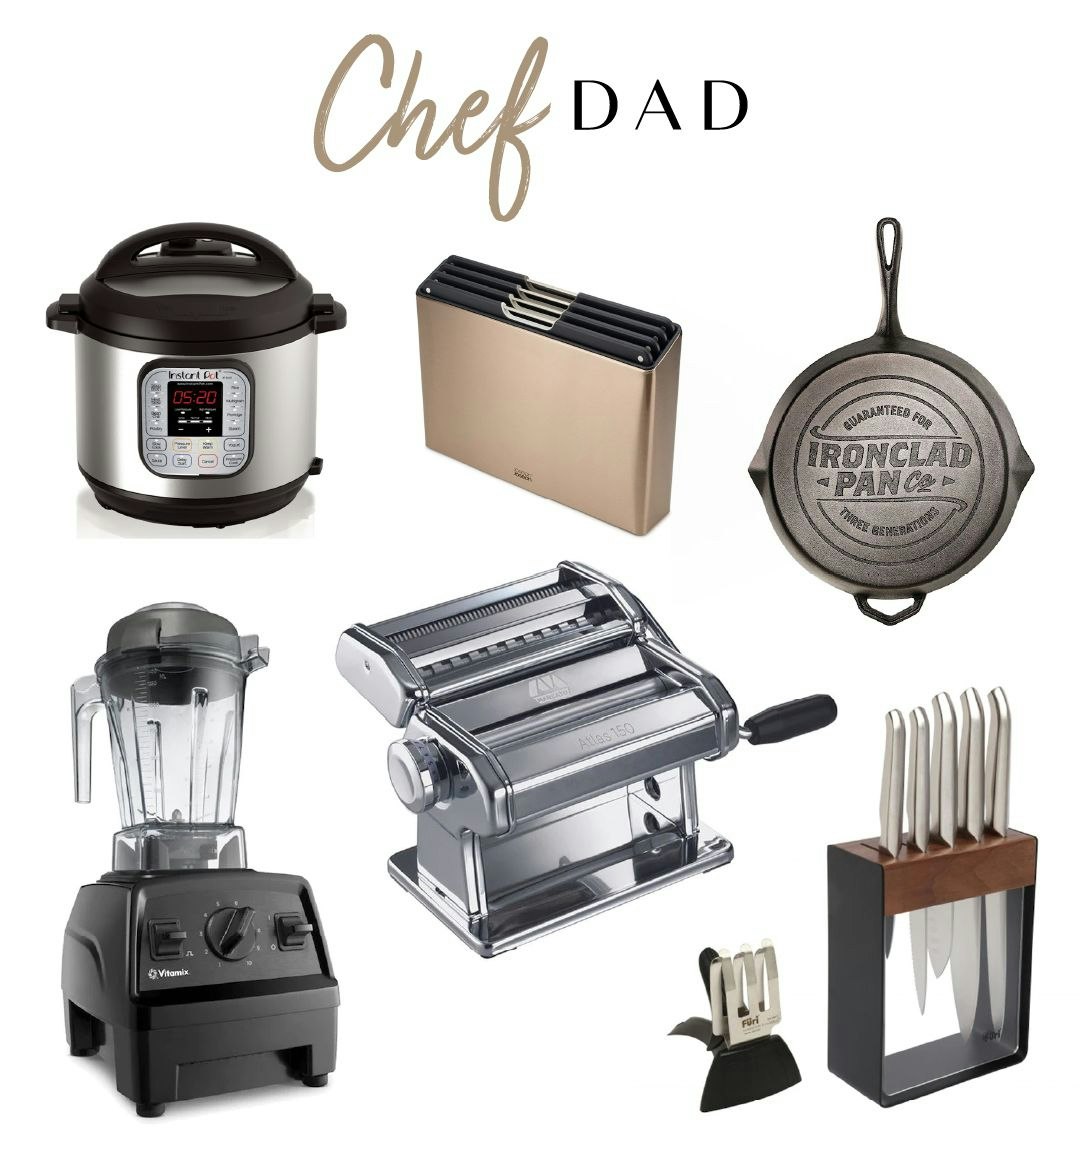 product images of Chef Dad wish list